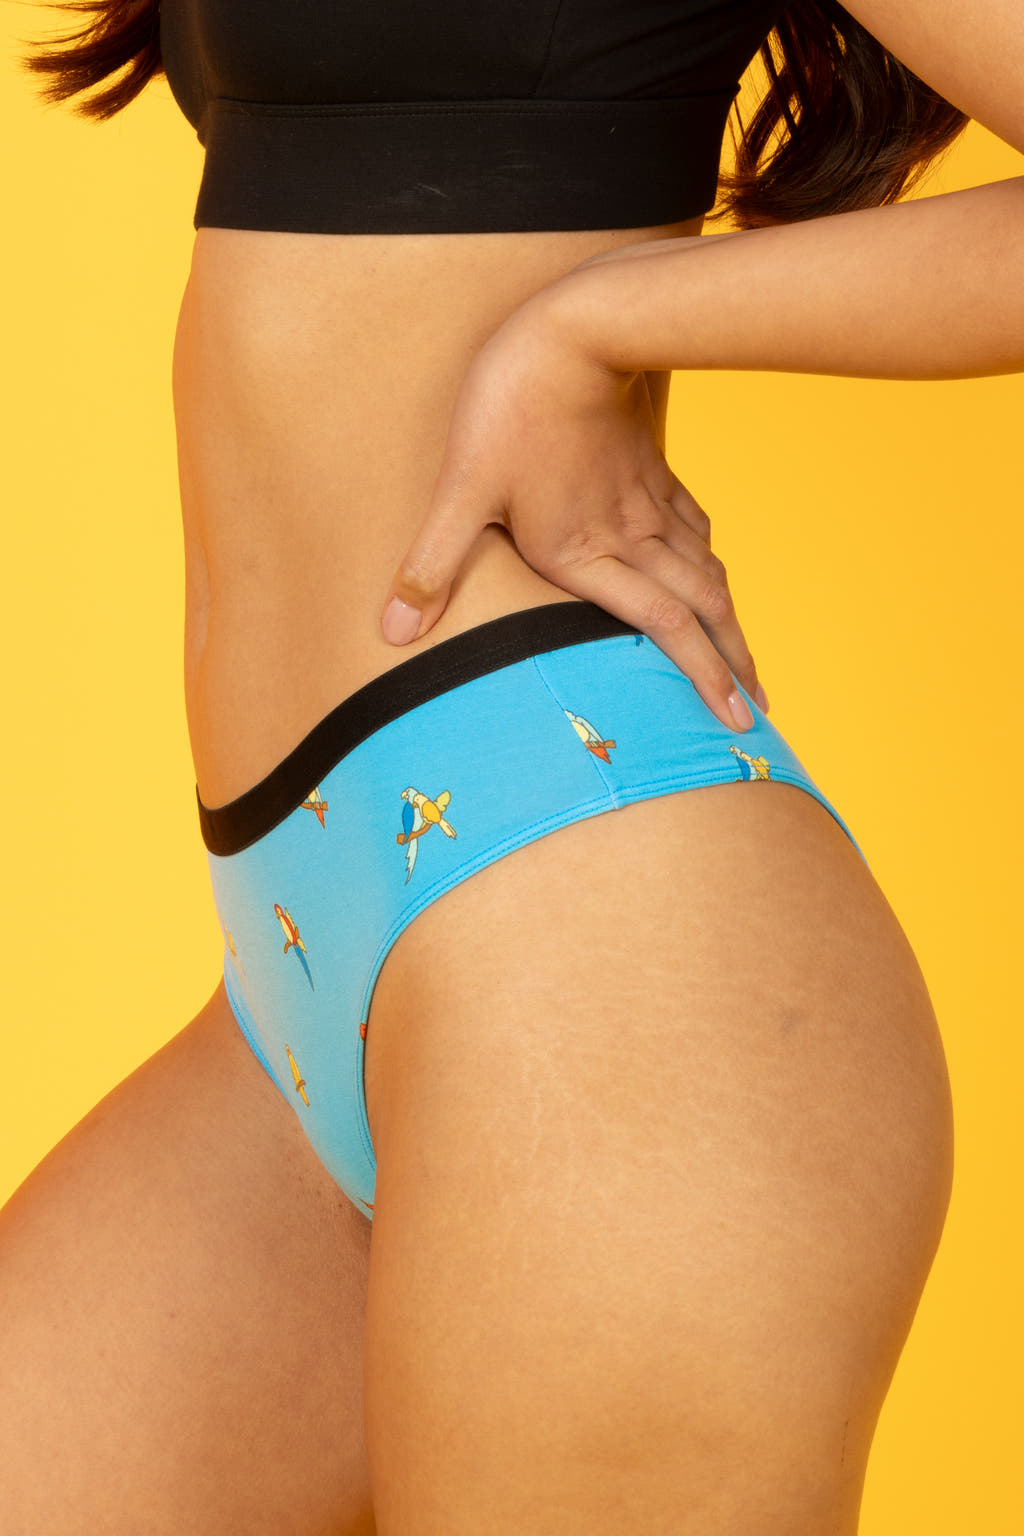 A cheeky underwear featuring a playful parrot design, embodying Shinesty's outlandish style. The Tweet Yourself | Parrot Cheeky Underwear captures whimsy with a bird motif.